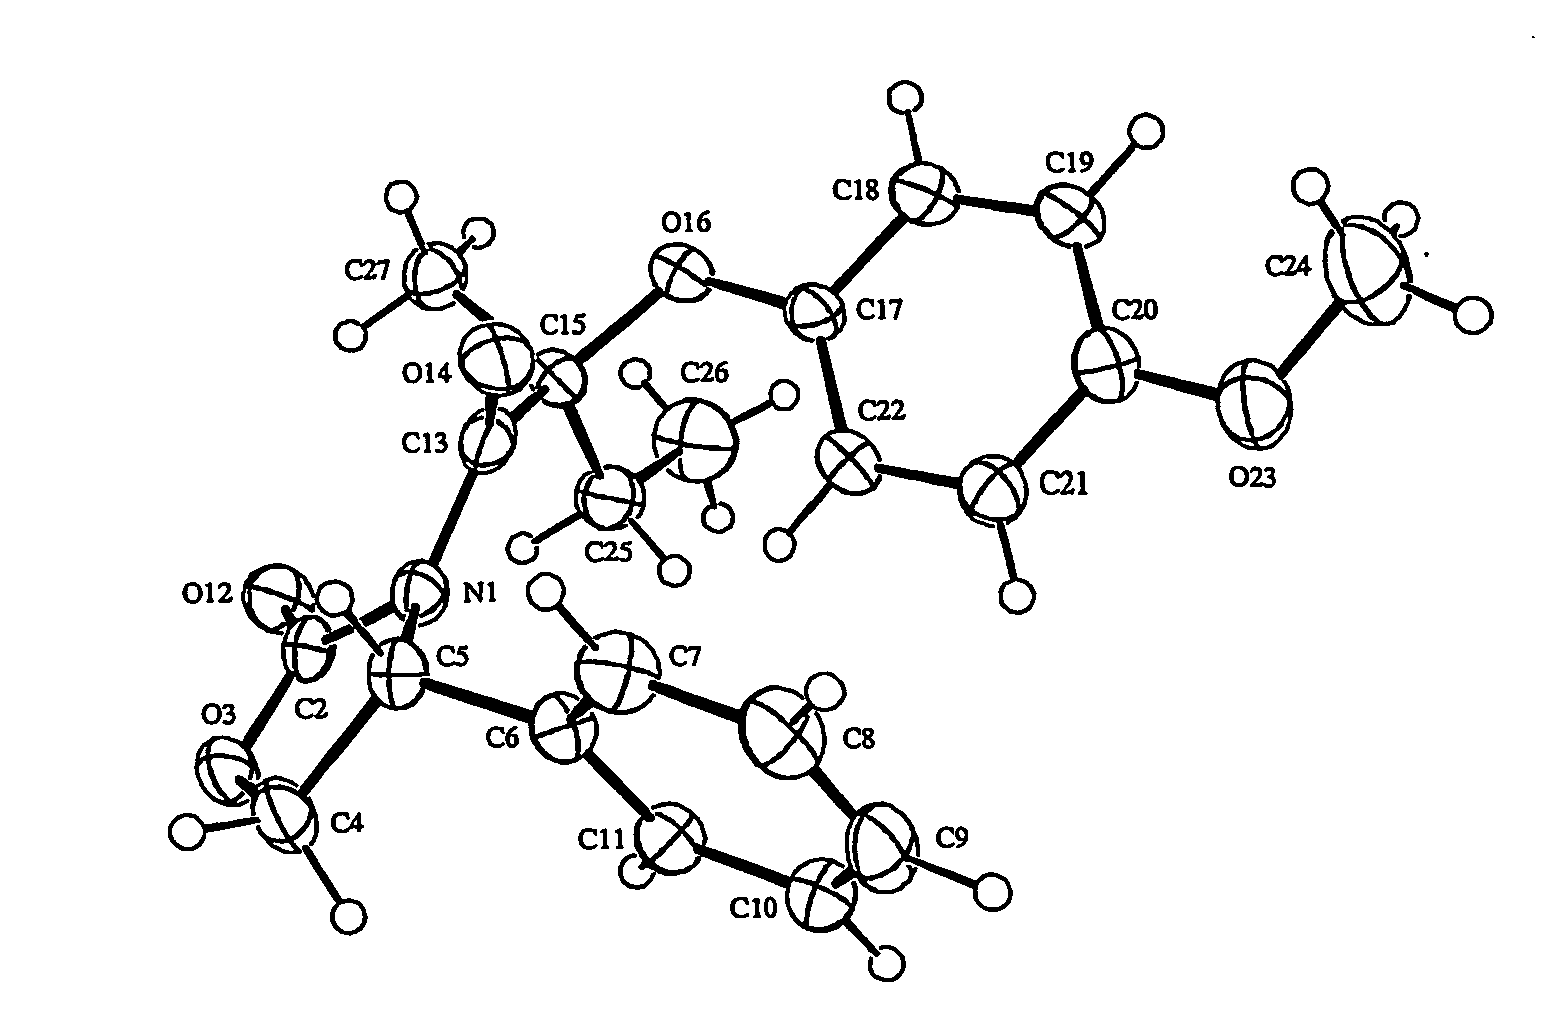 Ppar alpha selective compounds for the treatment of dyslipidemia and other lipid disorders